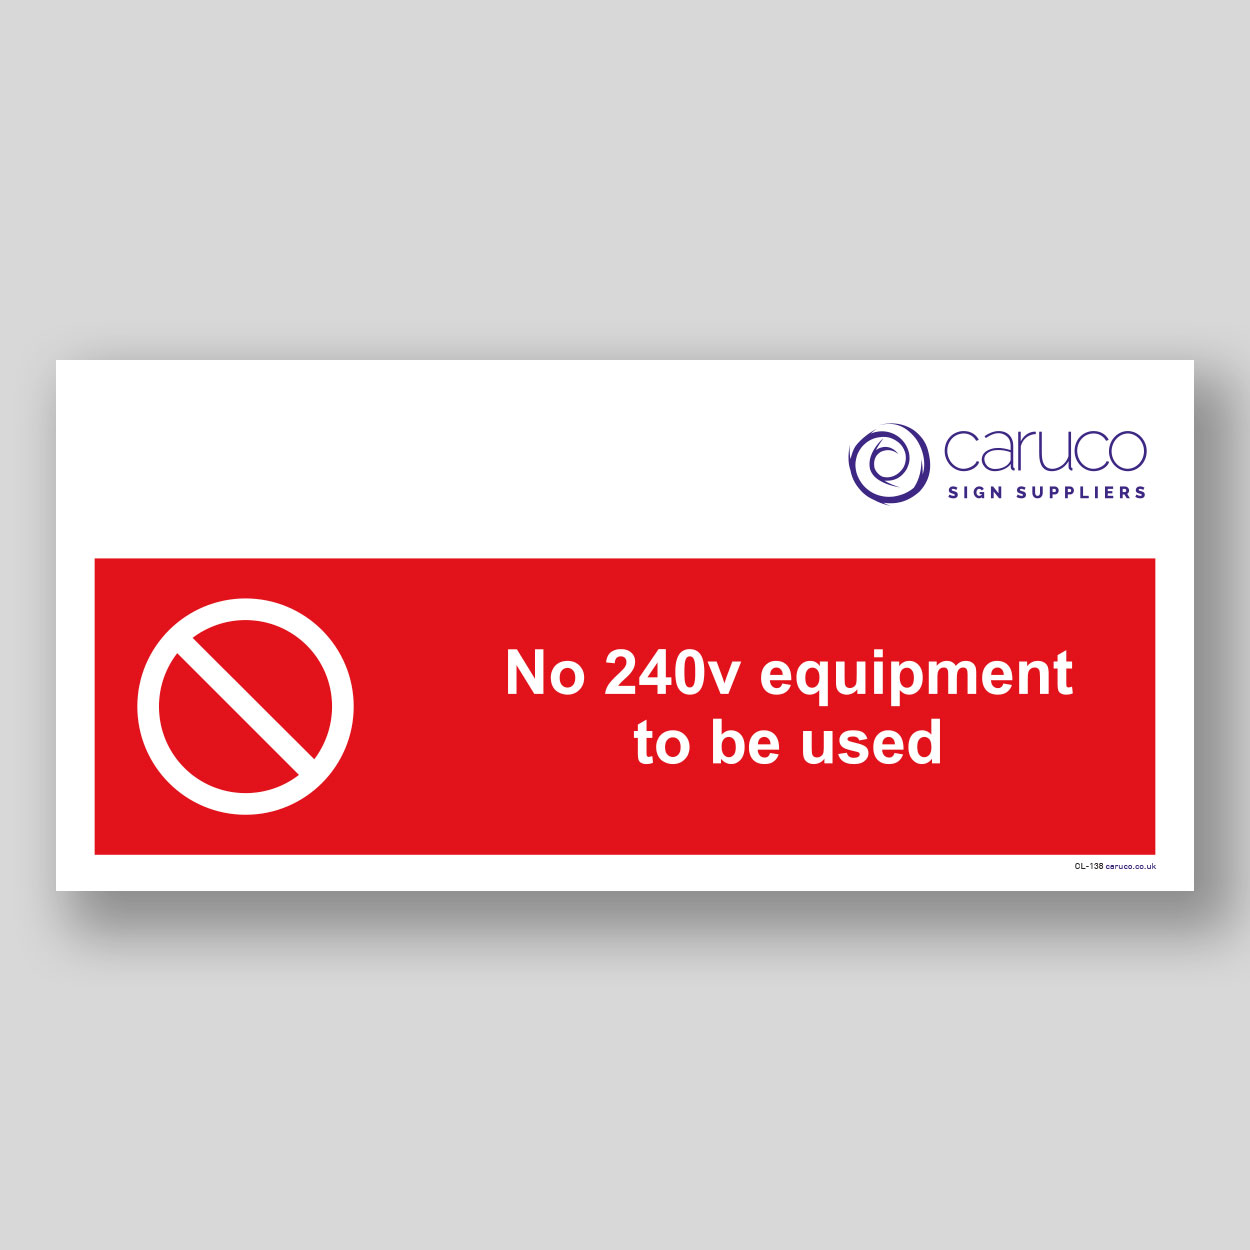 CL-138 No 240v equipment to be used